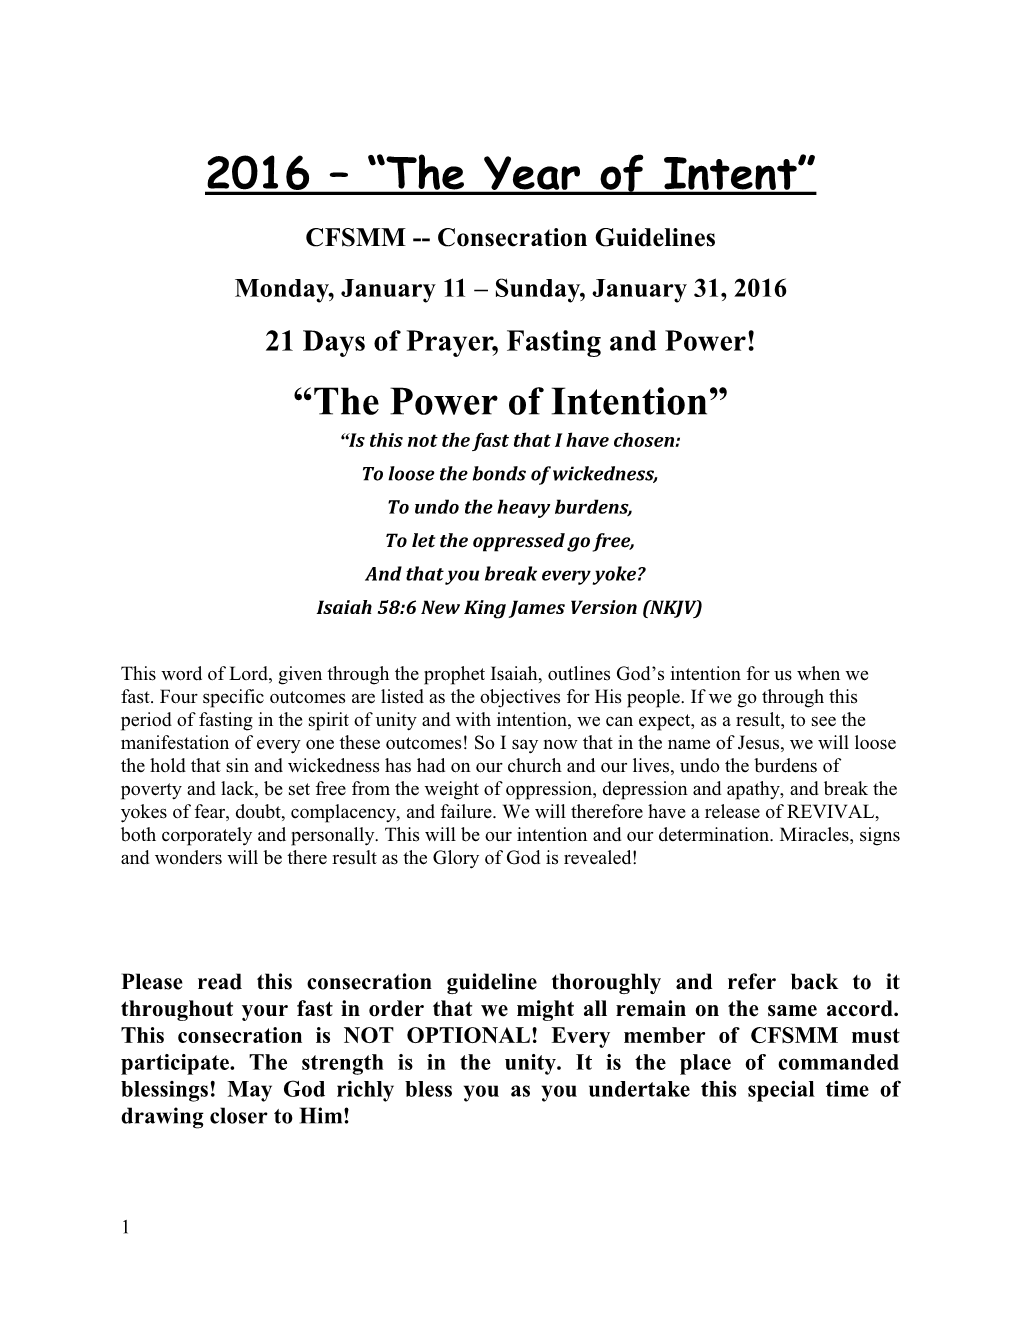 2016 the Year of Intent